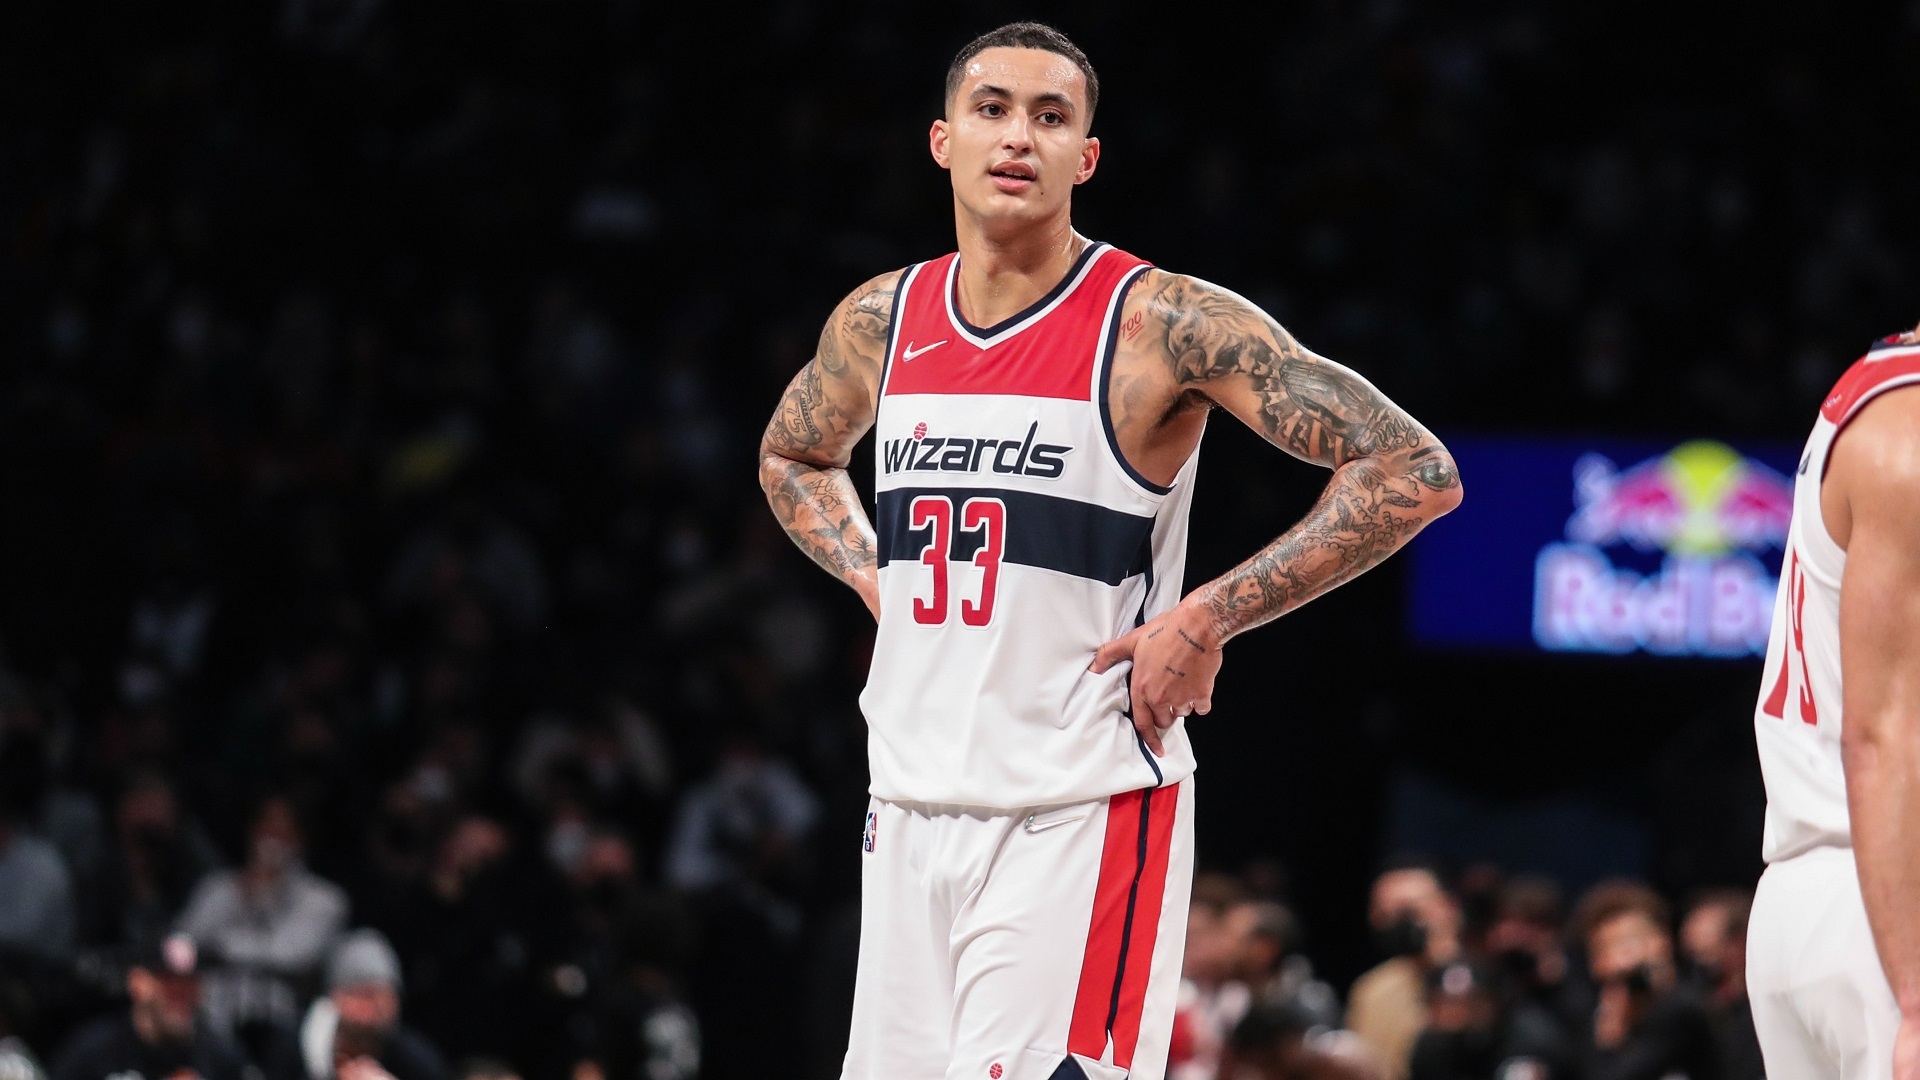 NBAer Kyle Kuzma Is the King of Stunt-Dressing. See Some of His Wildest  Looks. - WSJ